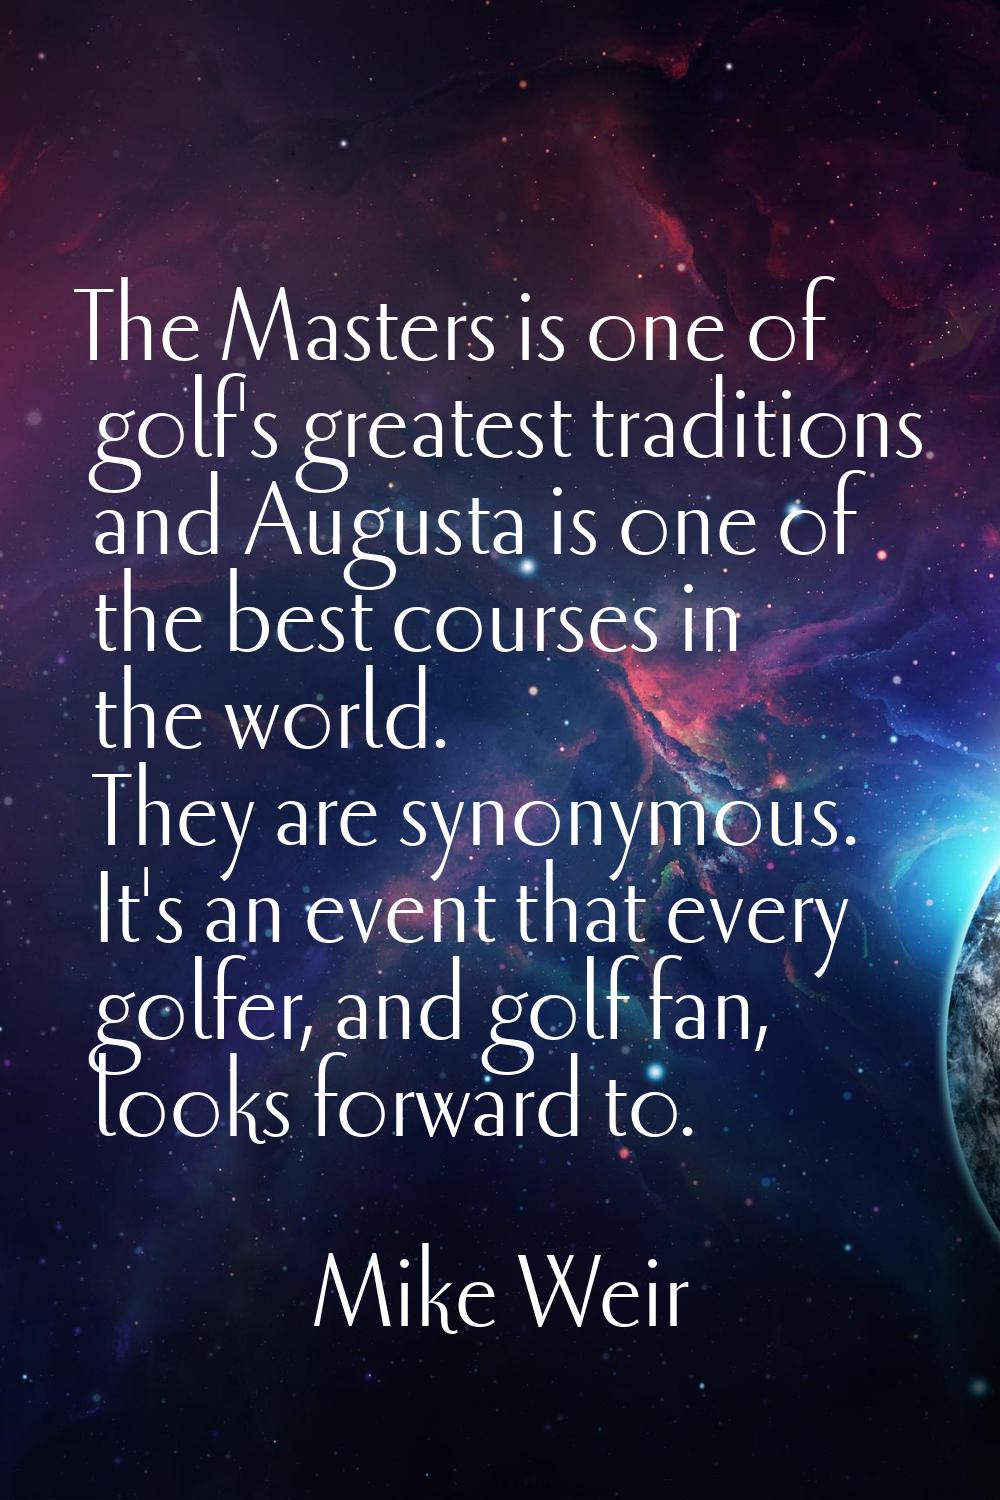 The Masters is one of golf's greatest traditions and Augusta is one of the best courses in the worl